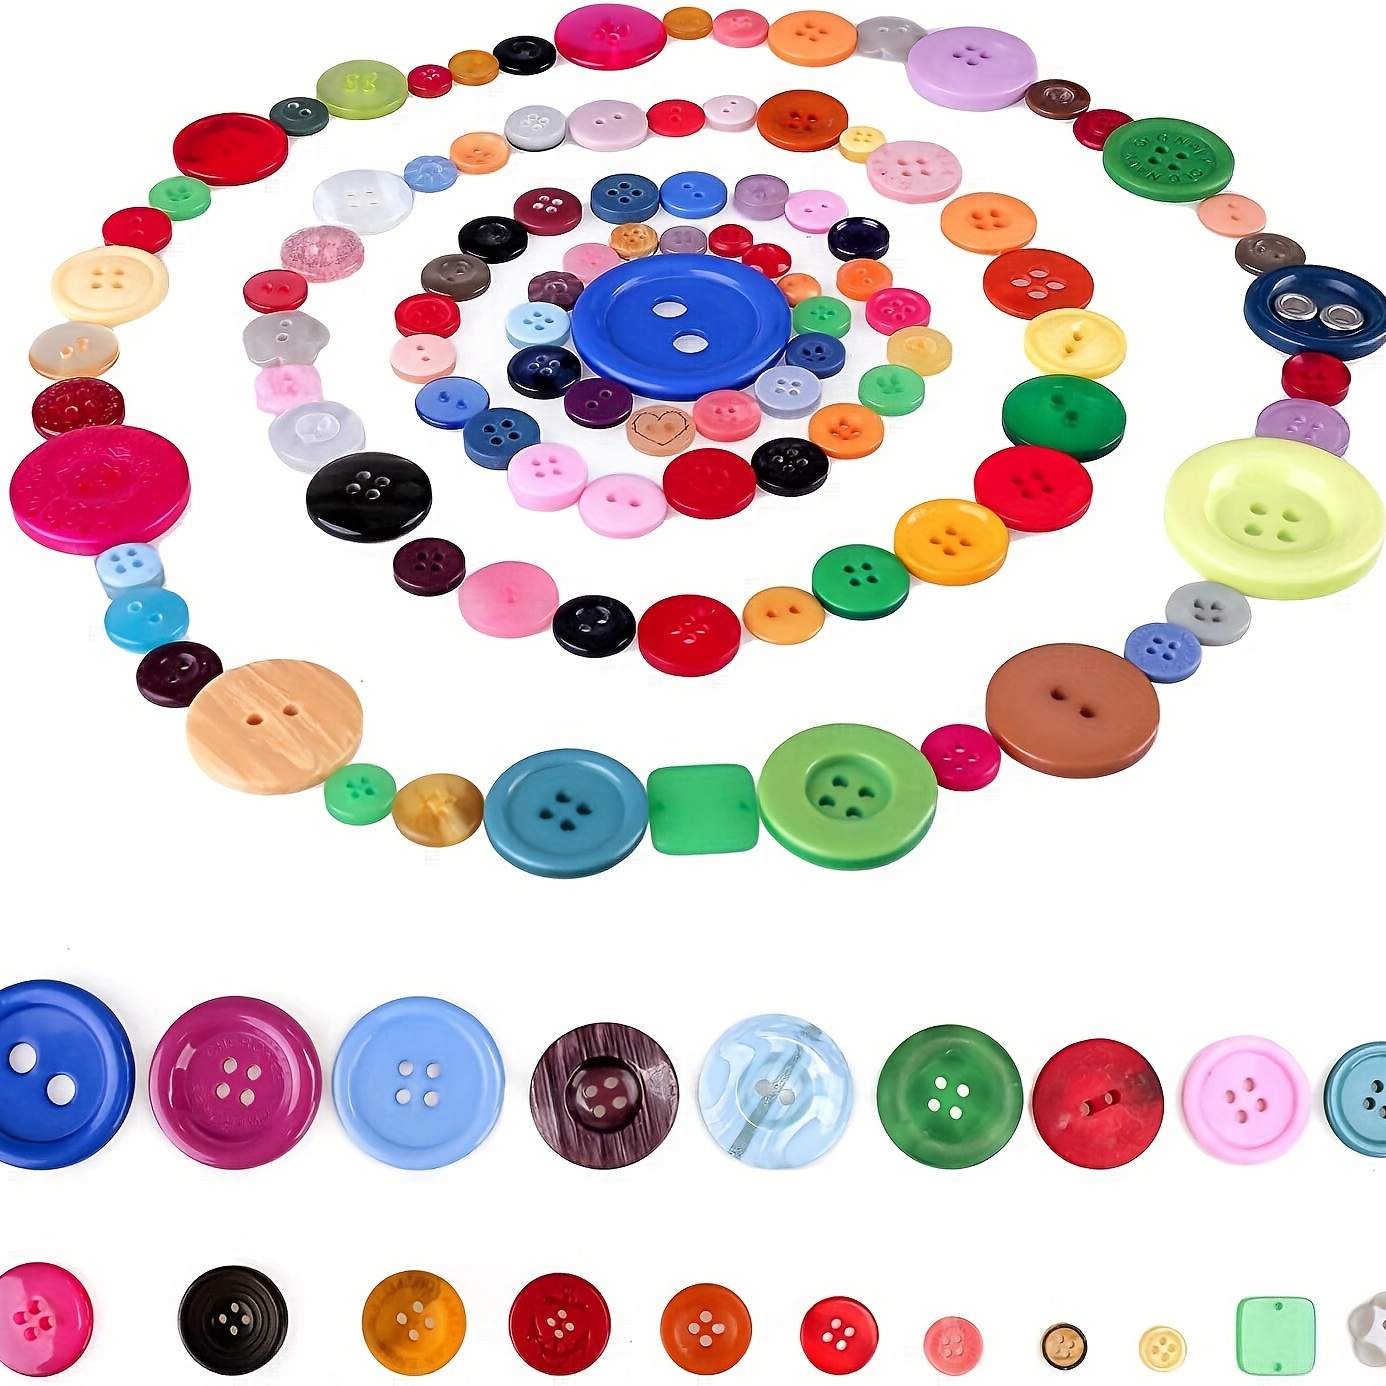 Resin Craft Buttons for Sewing, Assorted Sizes Red Buttons for DIY Crafts,  Children's Manual Button Painting, DIY Handmade Ornament, About 600 Pcs